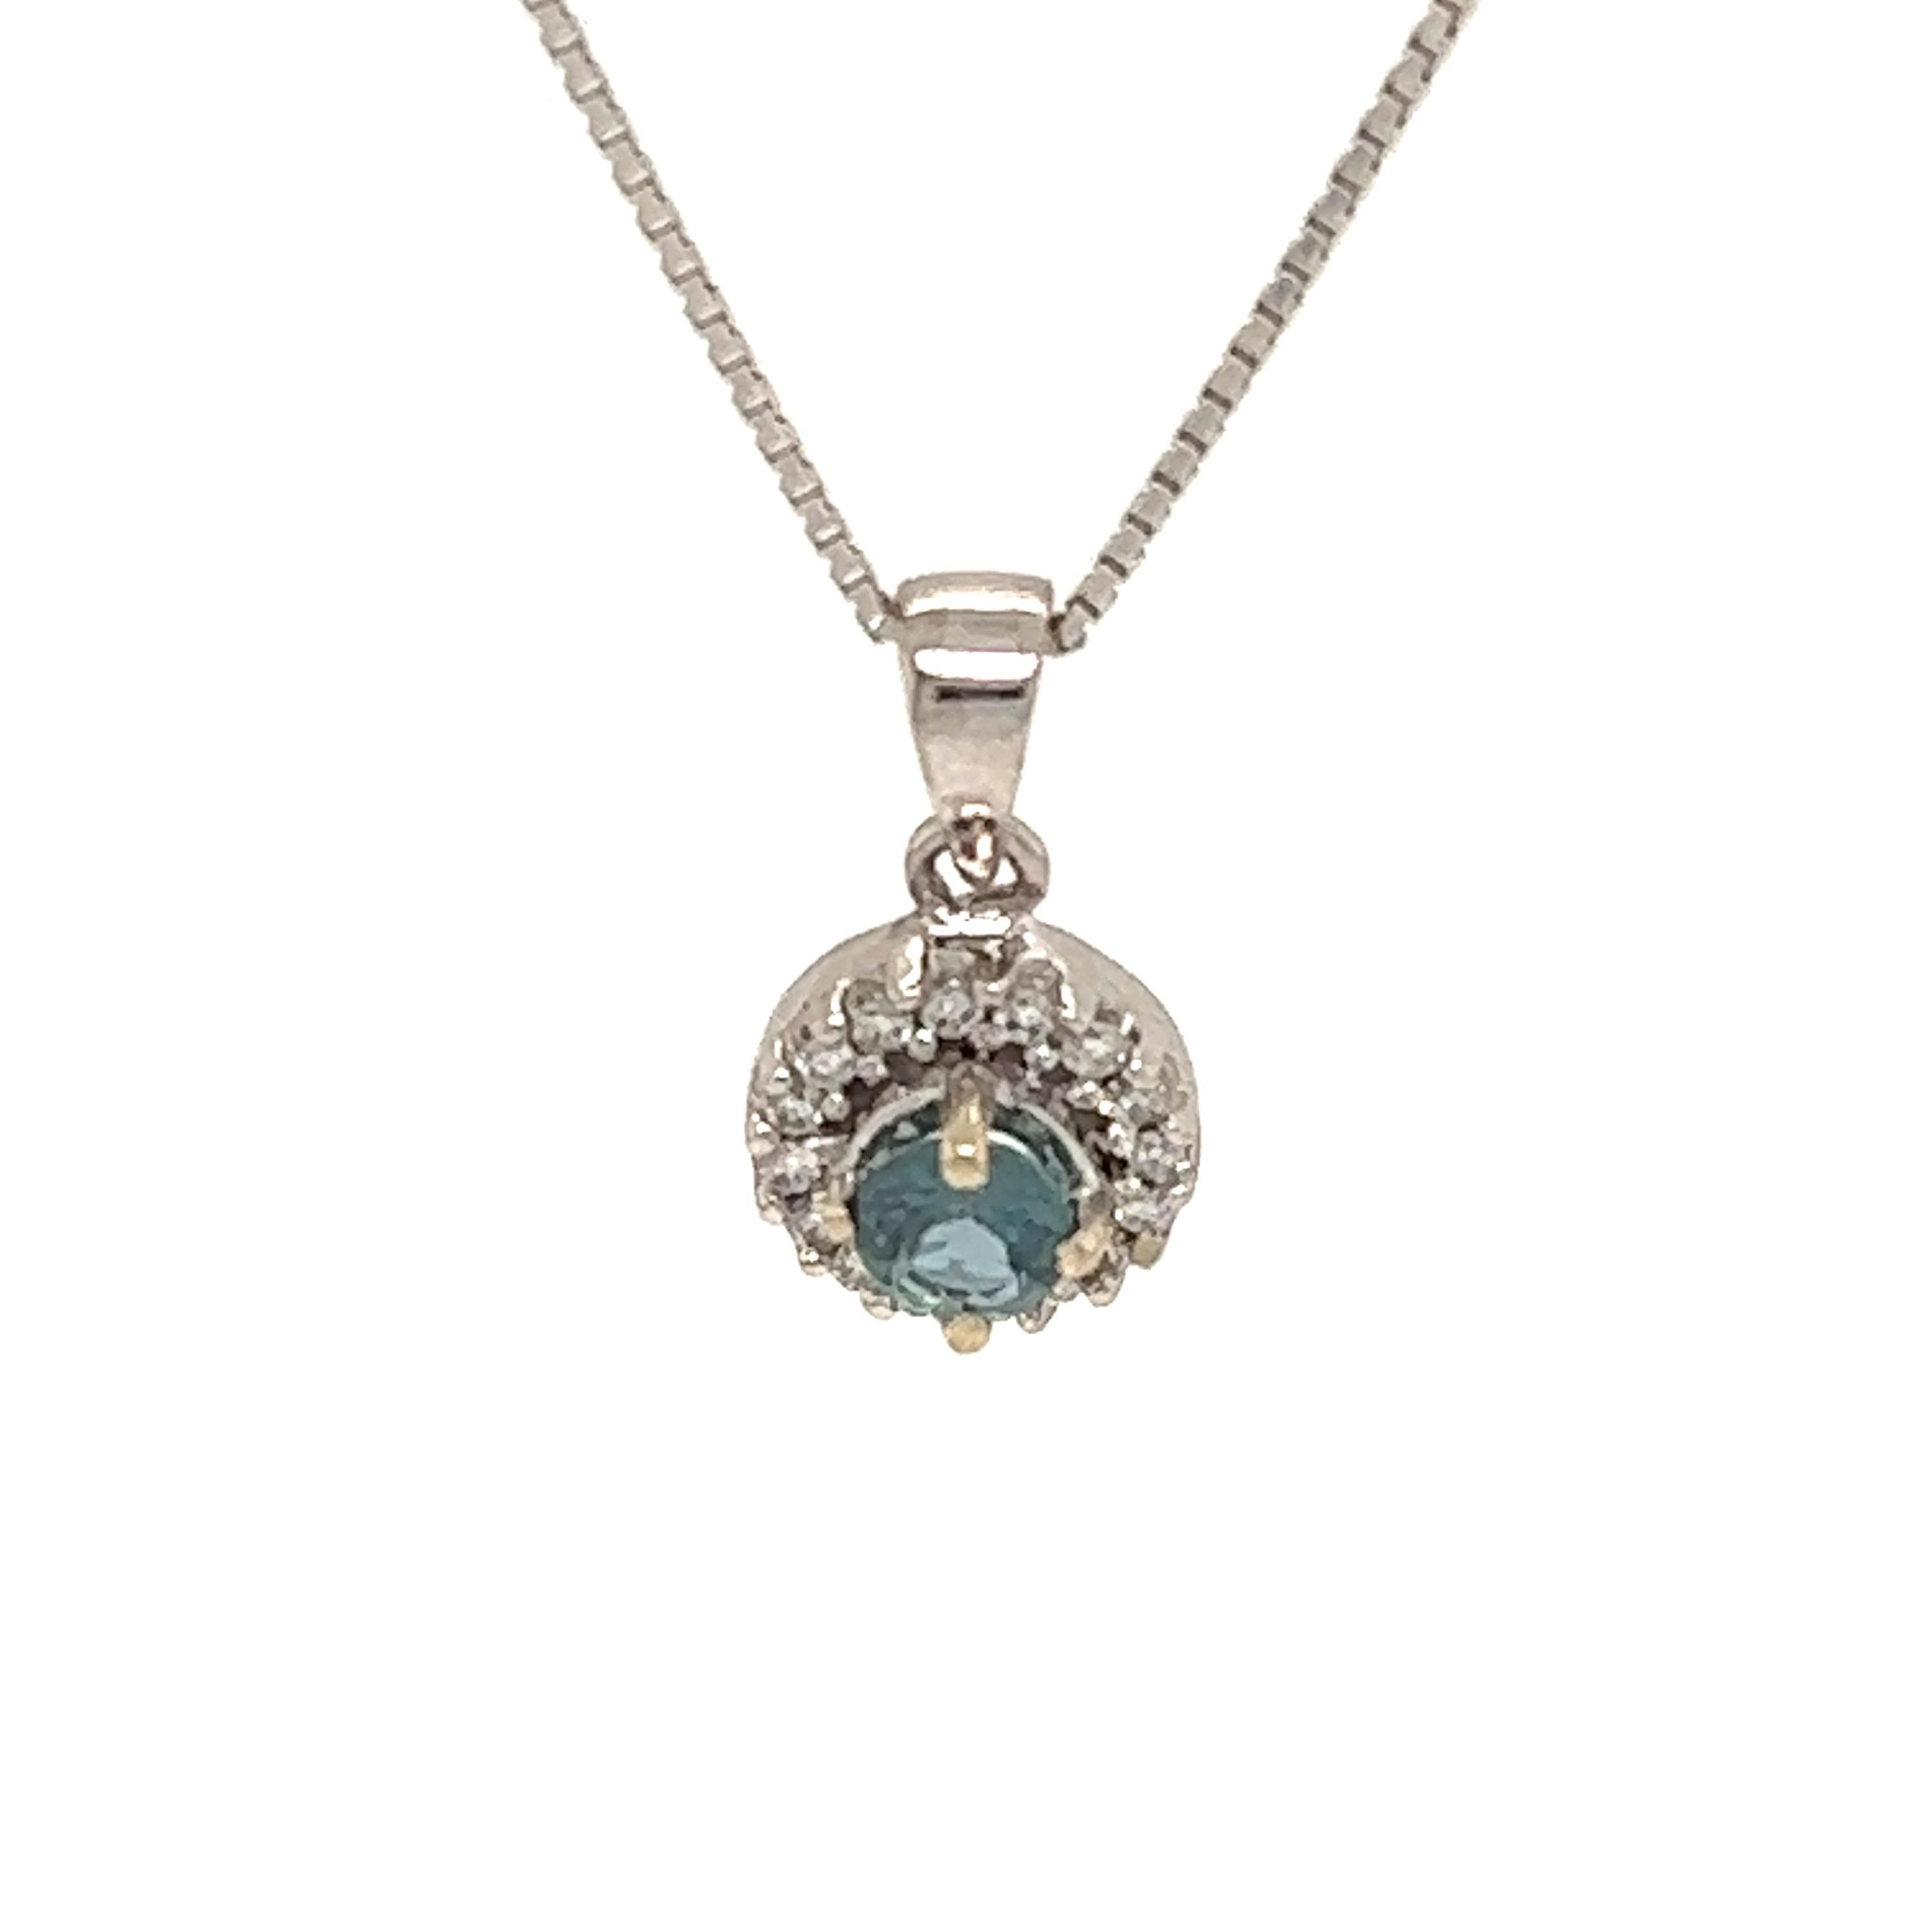 This is an exceptional natural round-shaped alexandrite and diamond pendant set in solid 14K white gold. The fancy 4.3MM Alexandrite has an excellent green color and is surrounded by a halo of round-cut white diamonds. The pendant is stamped 14K and